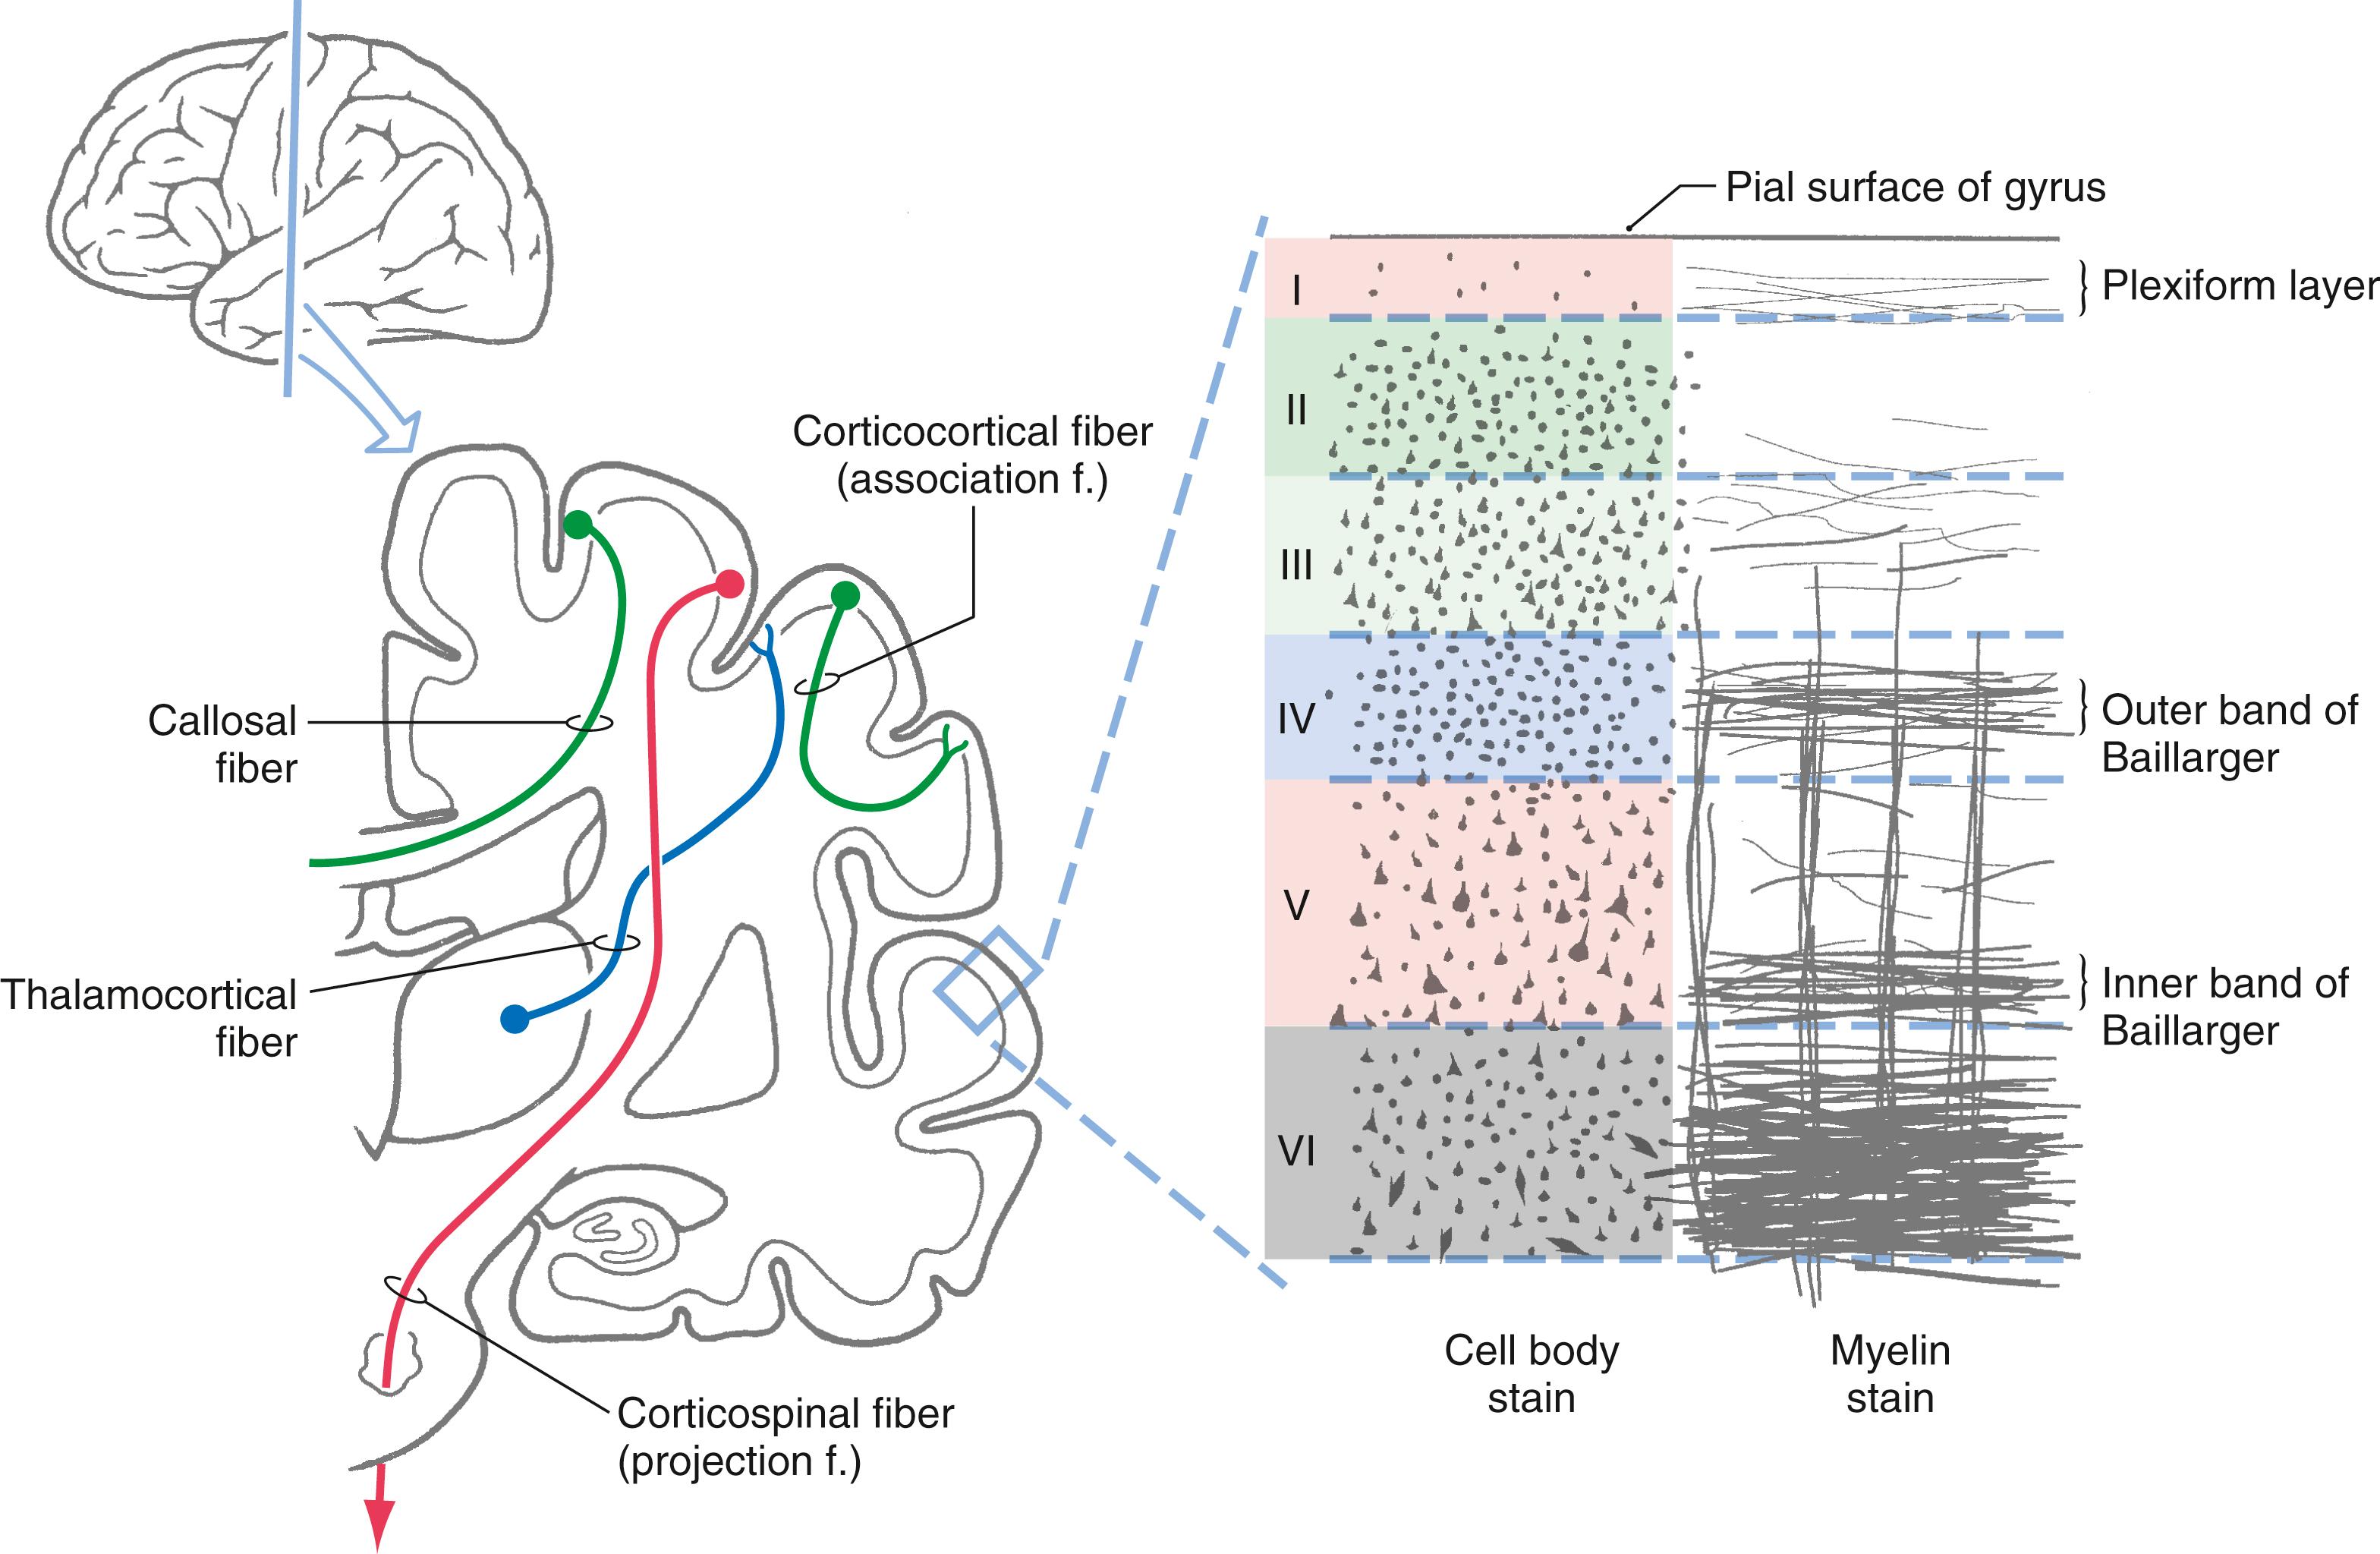 Fig. 32.1, A coronal section through the hemisphere ( left ) showing the major types of fibers projecting to and from the cerebral cortex. The representation on the right shows layers (I to VI) of the cerebral cortex as they appear after staining for cell bodies or for the myelin sheath.